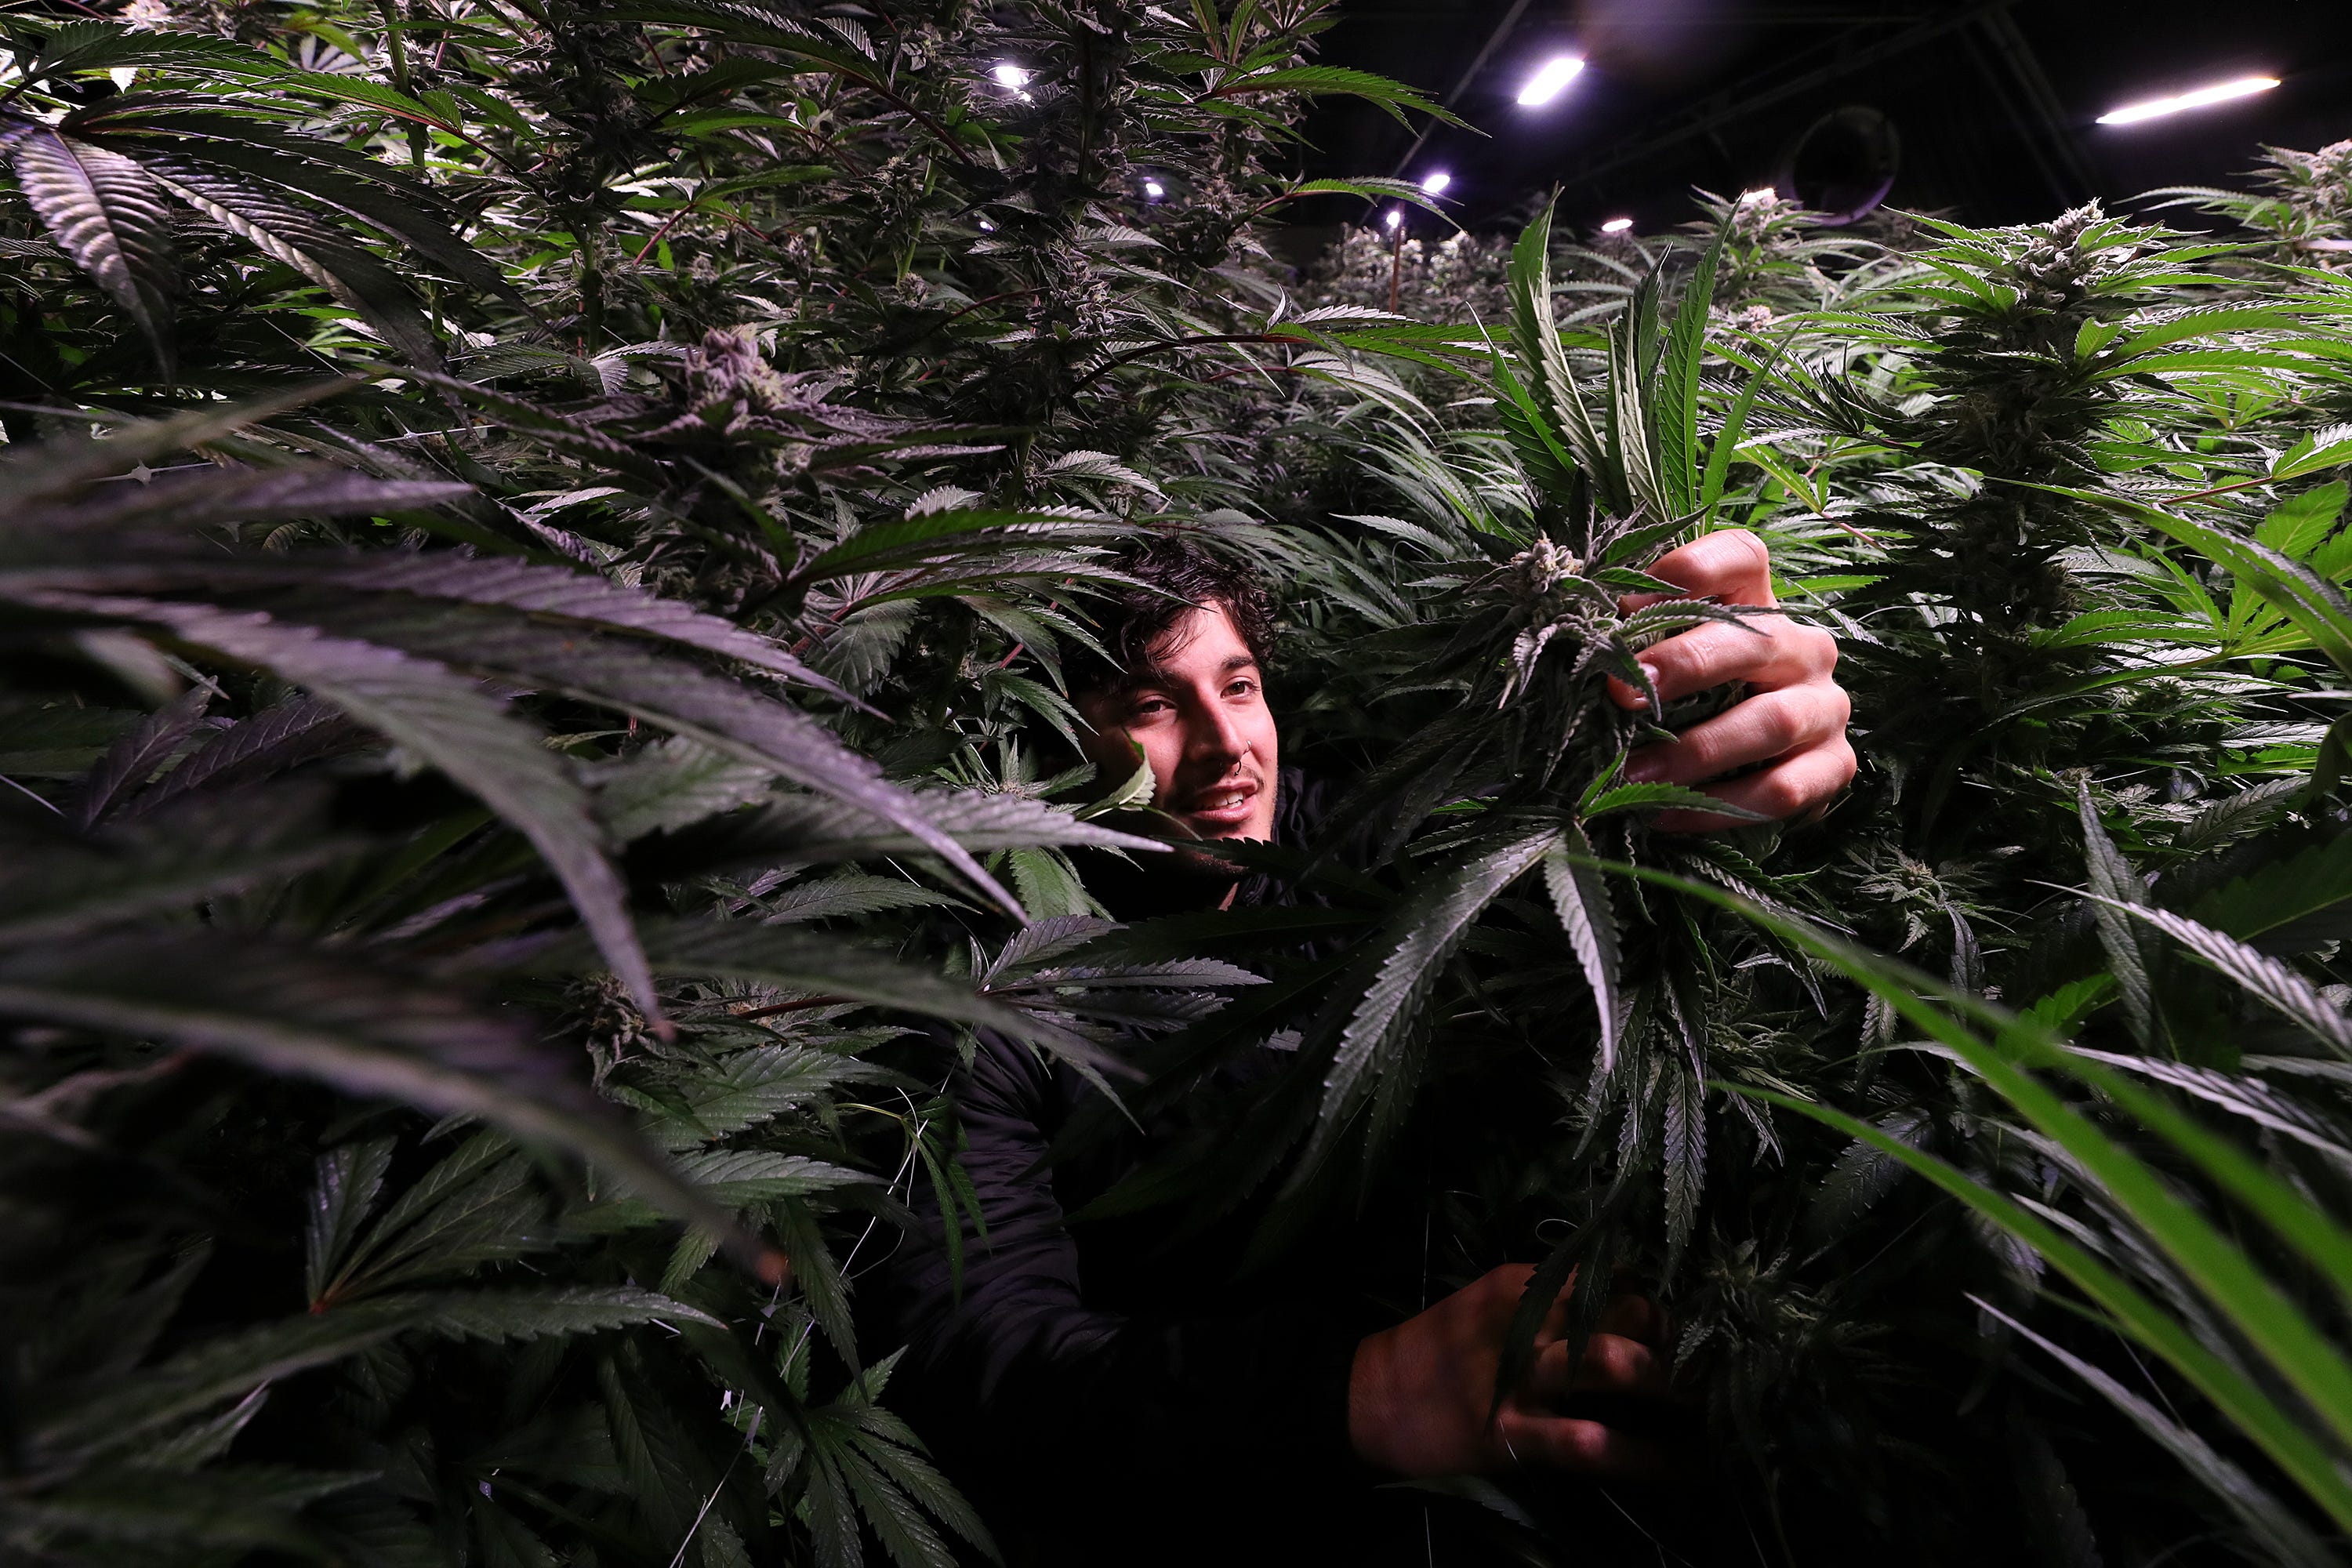 Iker Munoz shows a licensed grow operation, Mendo Select, in Potter Valley in Mendocino County, California.  There are 10 greenhouses on the property.  Dave Najera, a former U.S. Marine, said that he was drawn to the plant's medicinal properties in treating PTSD and now co-owns a cannabis business in Potter Valley on land that used to be a vineyard. "We were doing it before it was legal," he said.